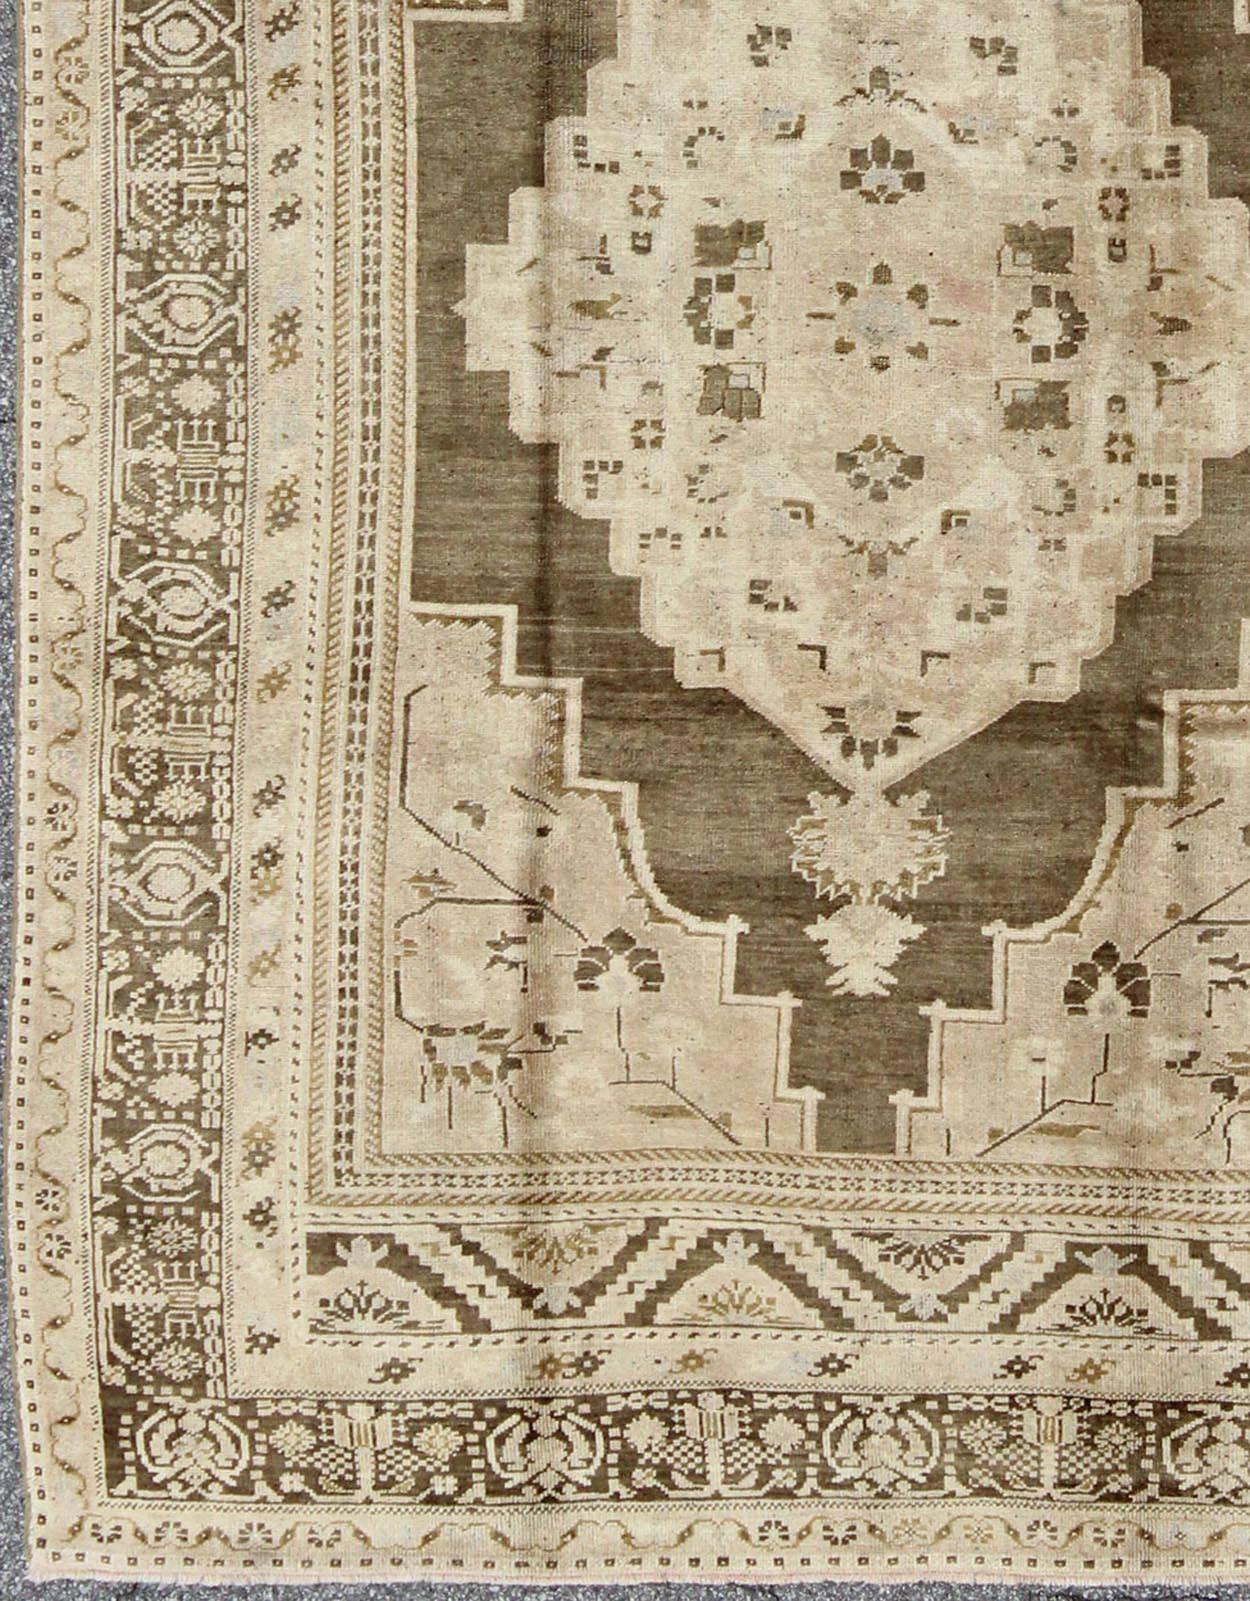 Medallion geometric tribal design Oushak rug vintage from Turkey, rug tu-ugu-95066, country of origin / type: Turkey / Oushak, circa 1940

This striking Turkish Oushak rug bears a rich mocha colored body that is highlighted by a dazzling linear